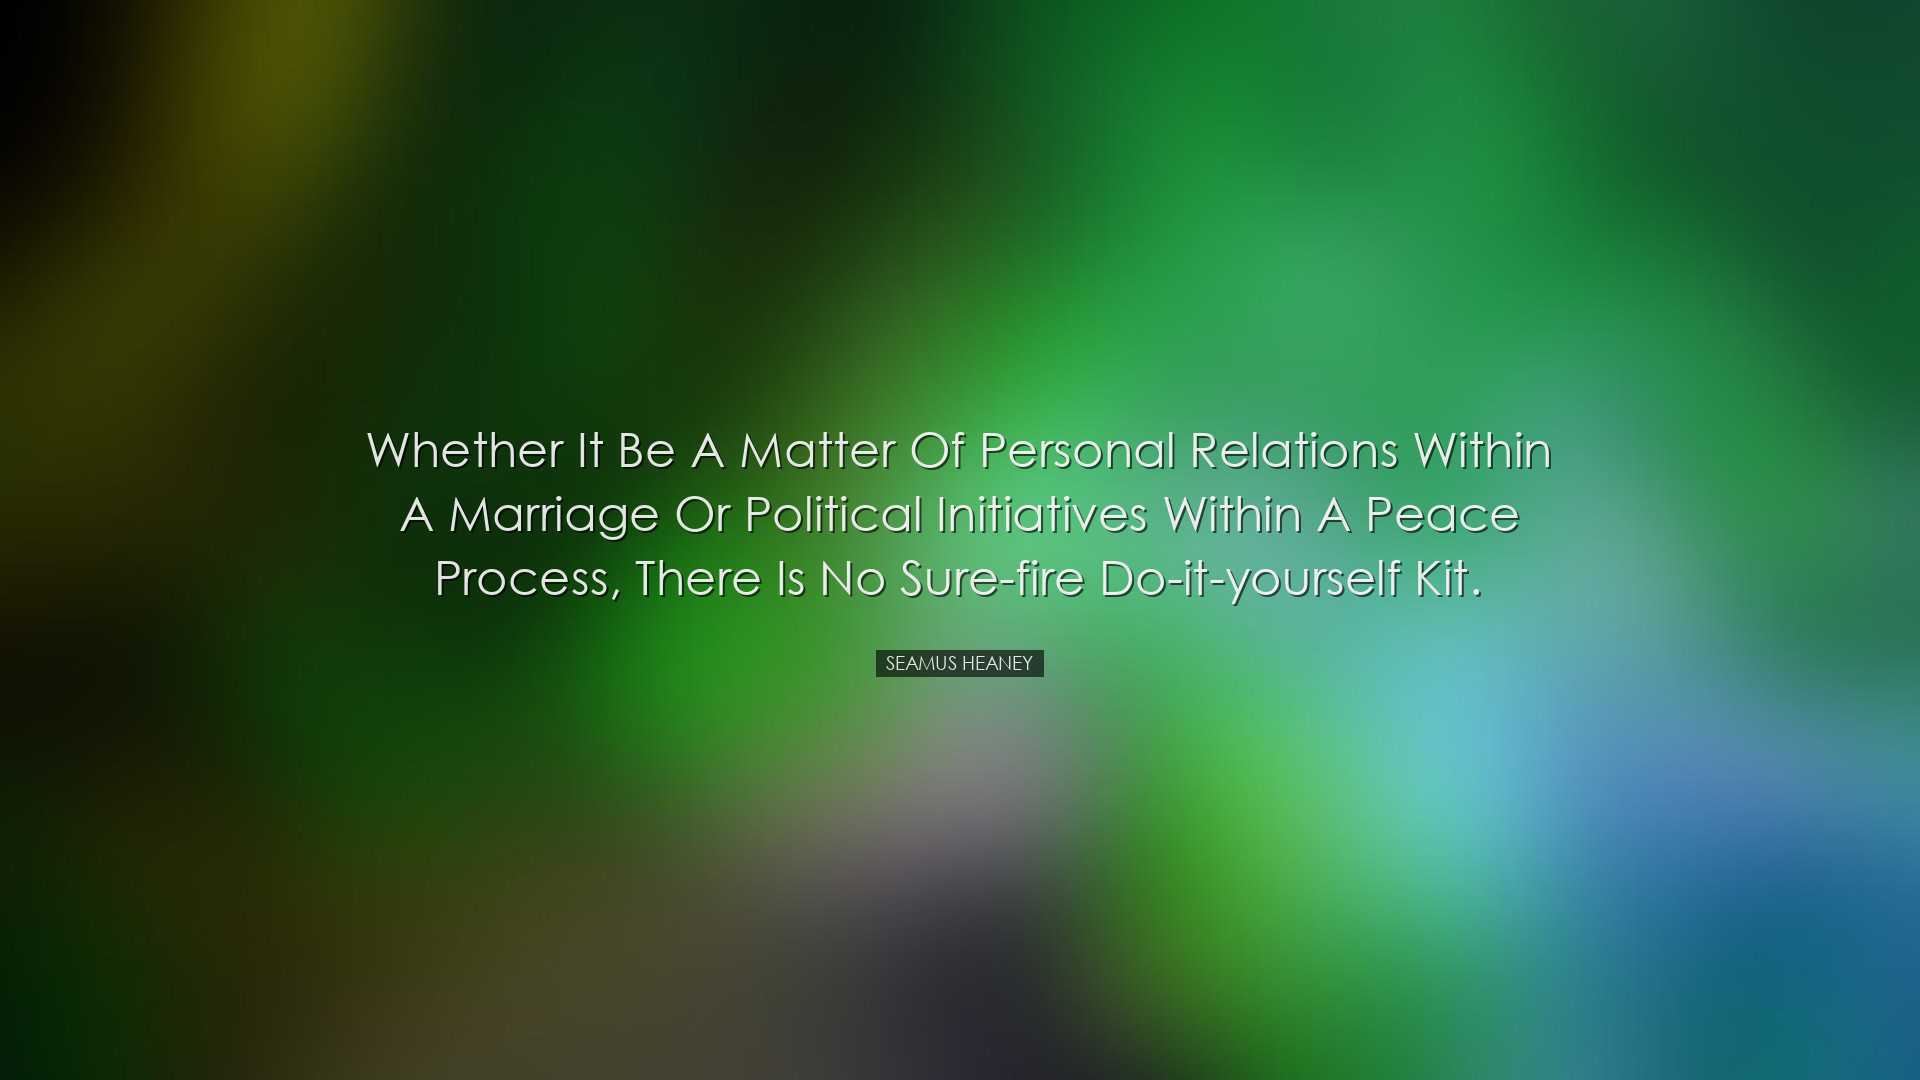 Whether it be a matter of personal relations within a marriage or